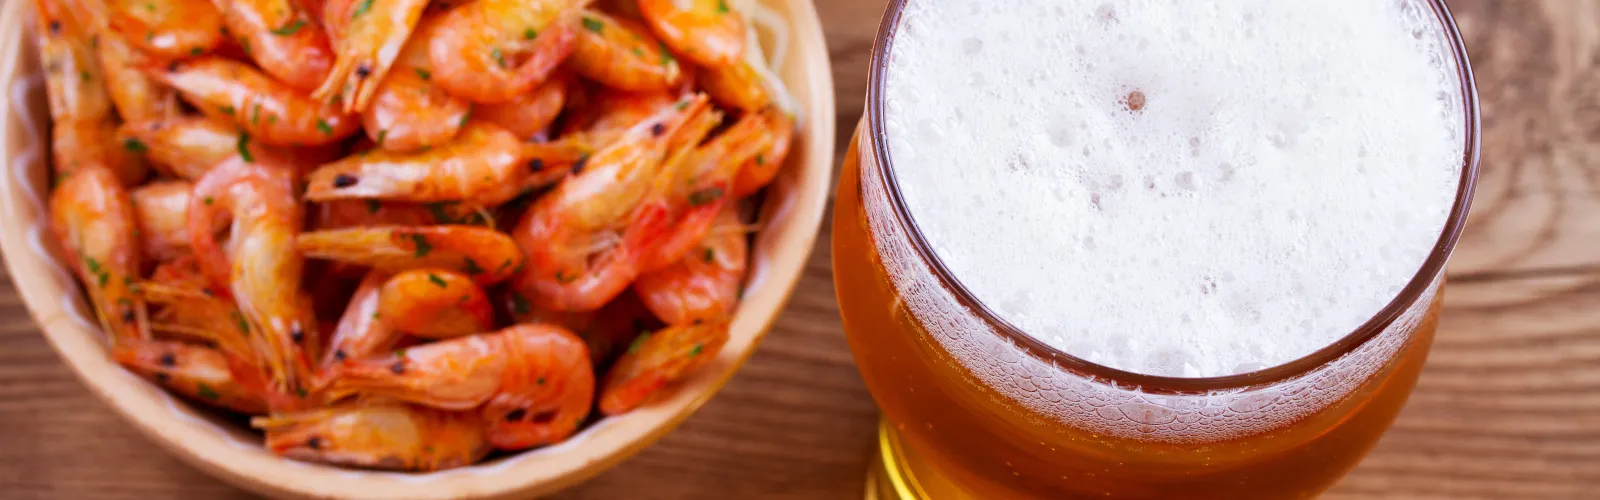 A bowl of shrimp and a glass of beer